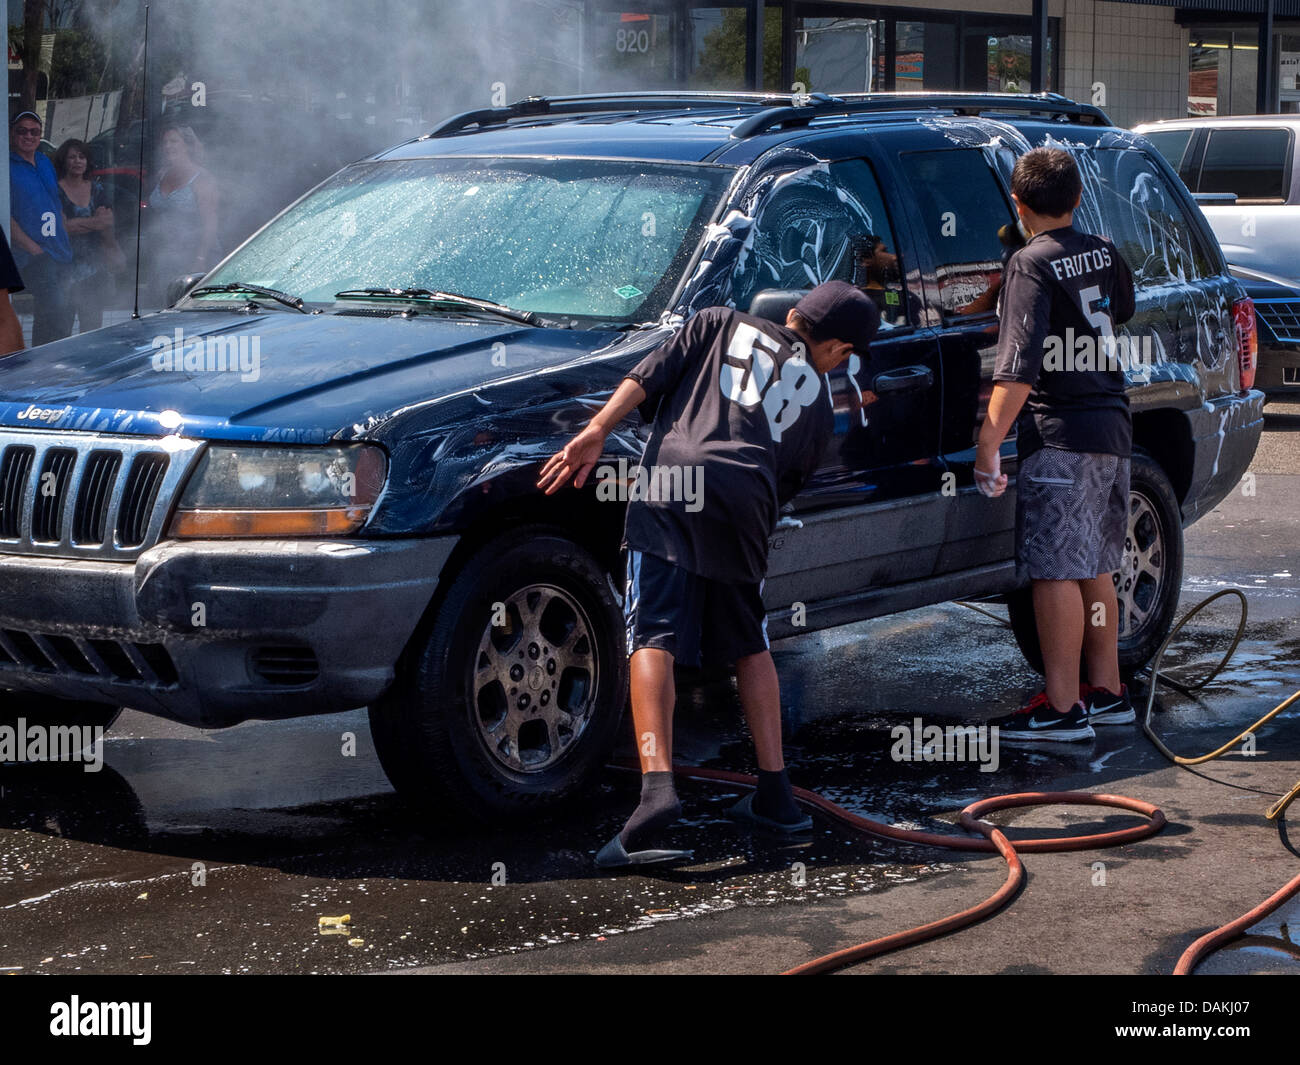 Multiethnic local children assist at a fund-raising charity car wash in a Southern California strip mall on a sunny afternoon. Stock Photo